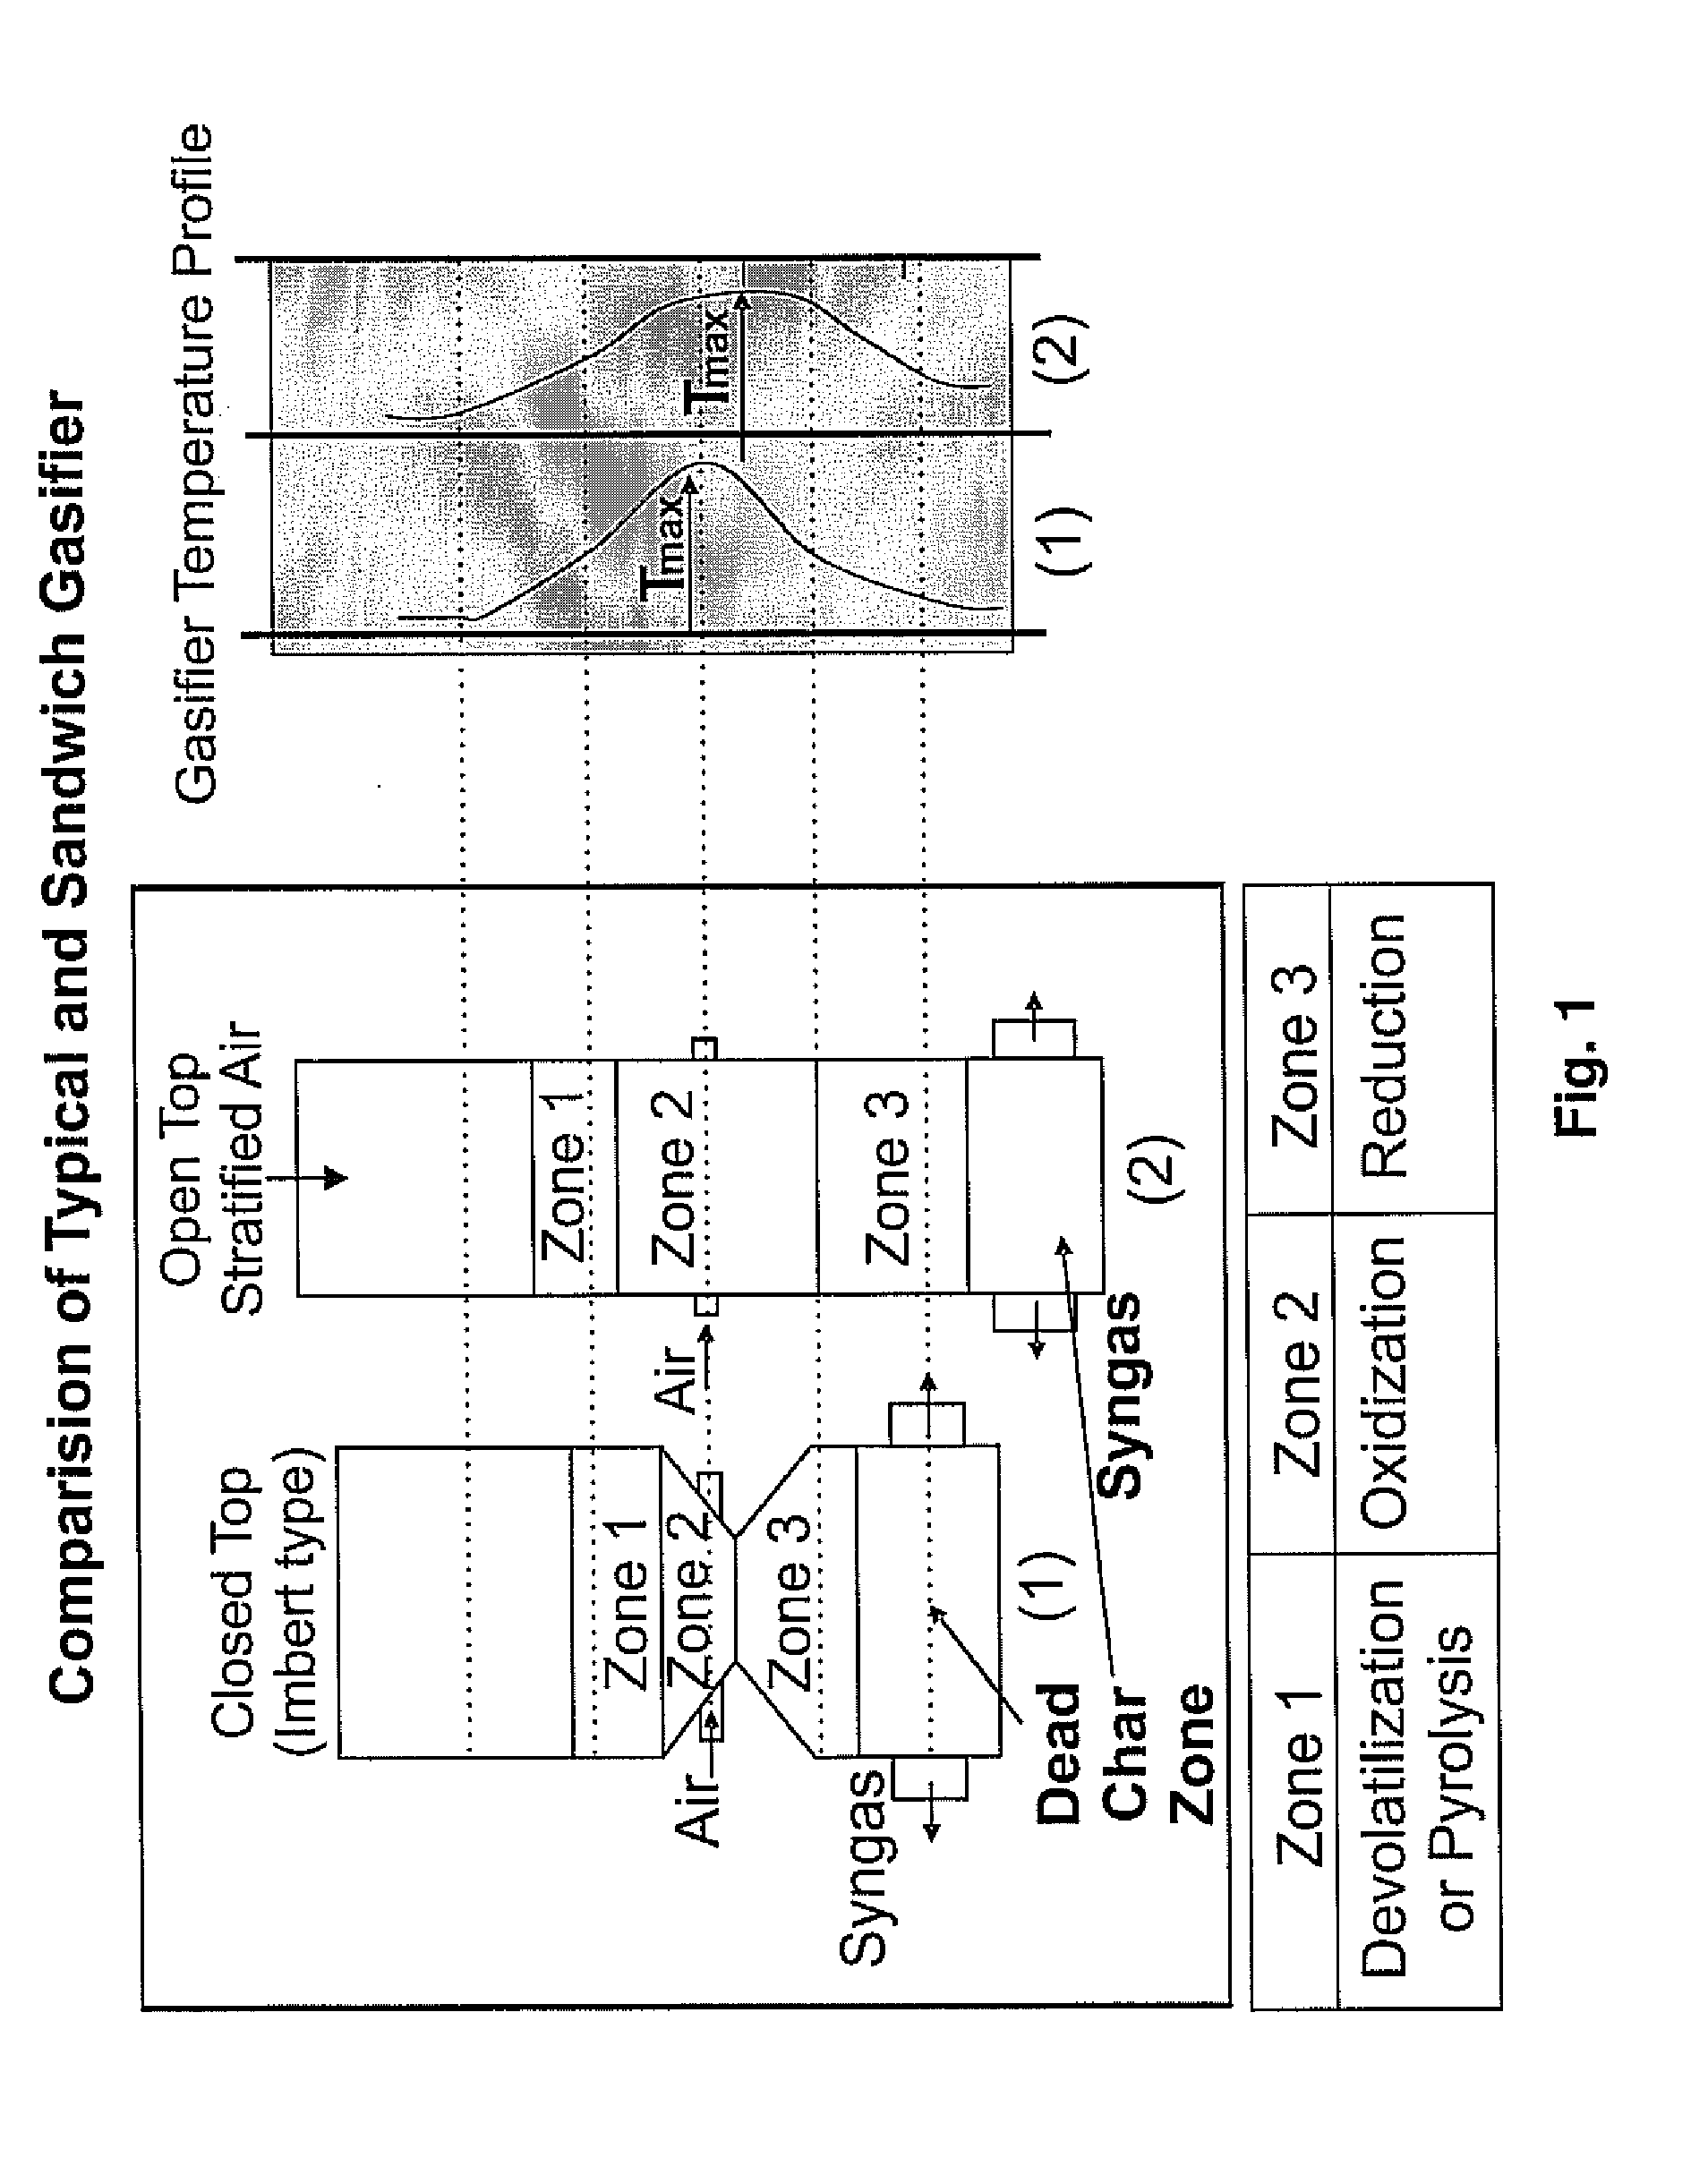 Sandwich gasification process for high-efficiency conversion of carbonaceous fuels to clean syngas with zero residual carbon discharge